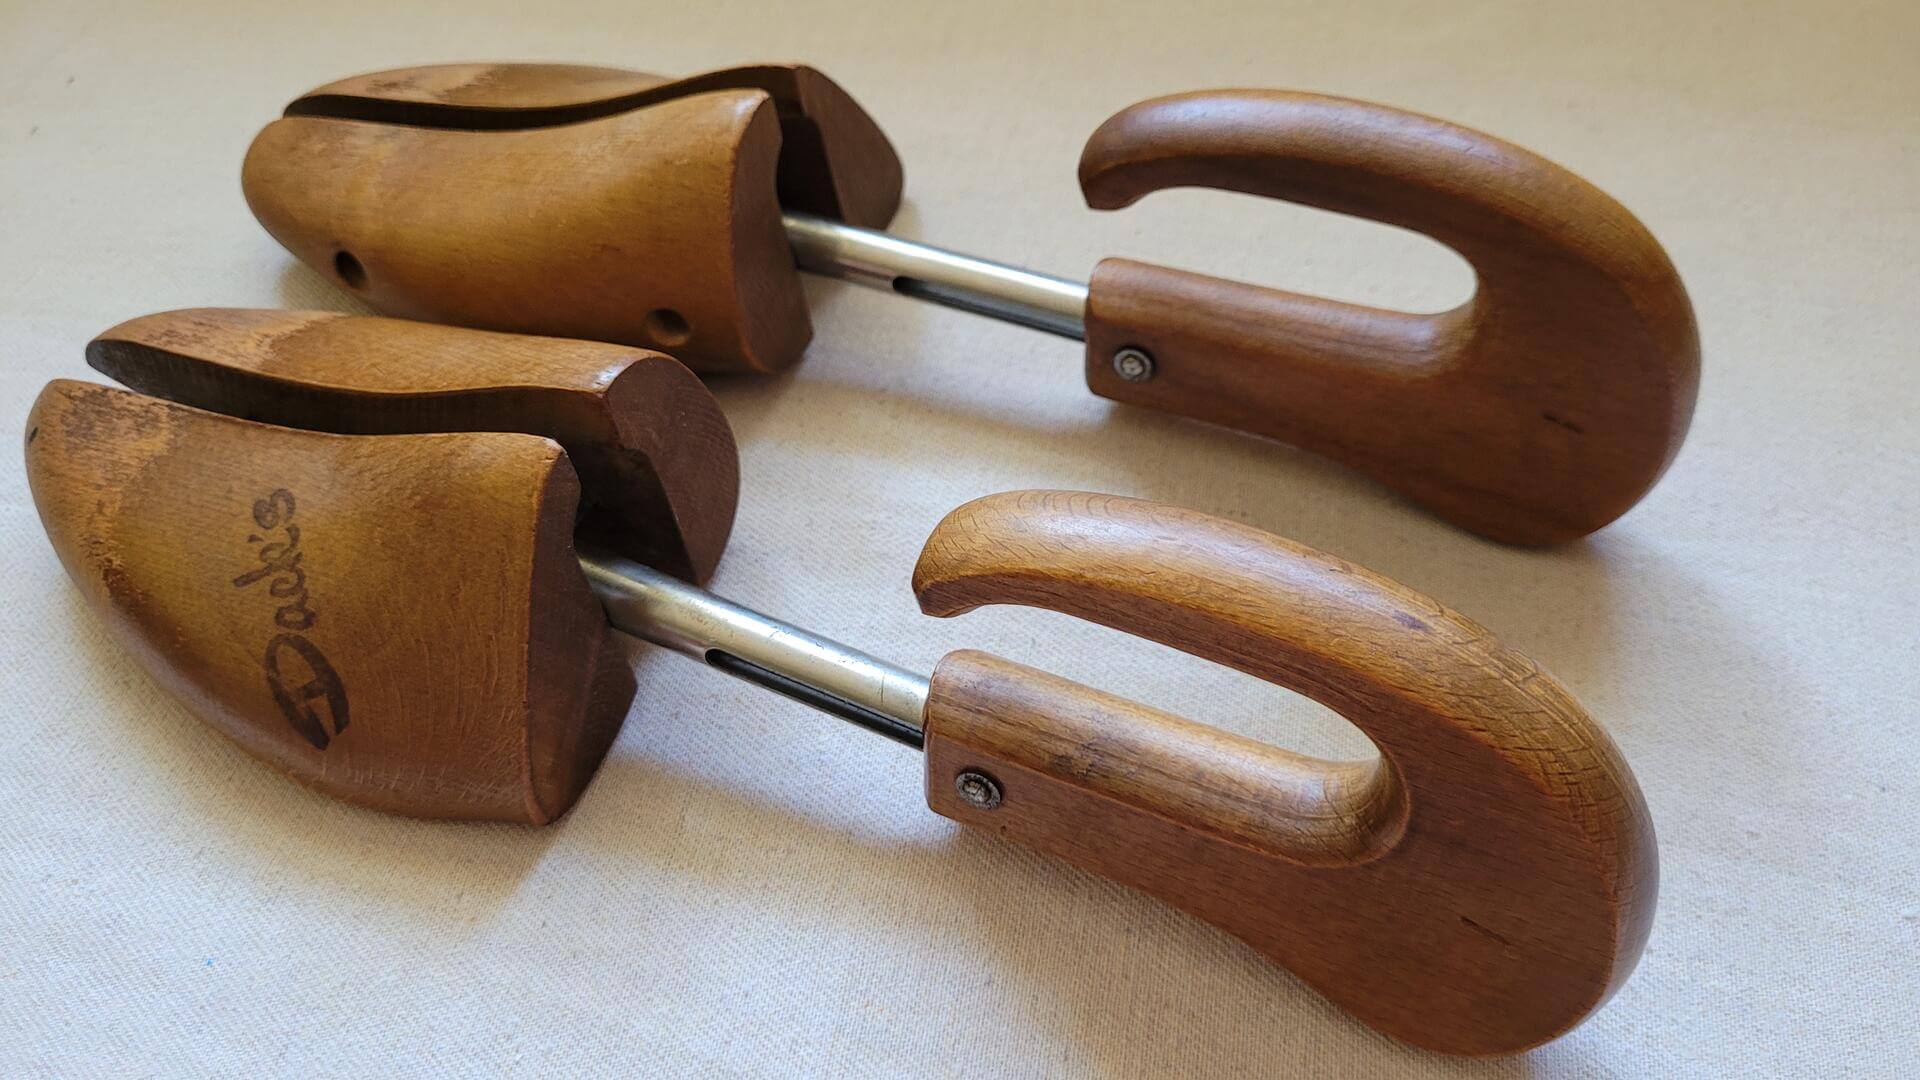 Nice pair of rare vintage Dack's split toes wooden stretcher tree size 10-11 by Matthew Dack, most prestigious and recognized Canadian luxury men’s footwear brand. Antique collectible made in Canada cobbler shoe shaping tools and accessories